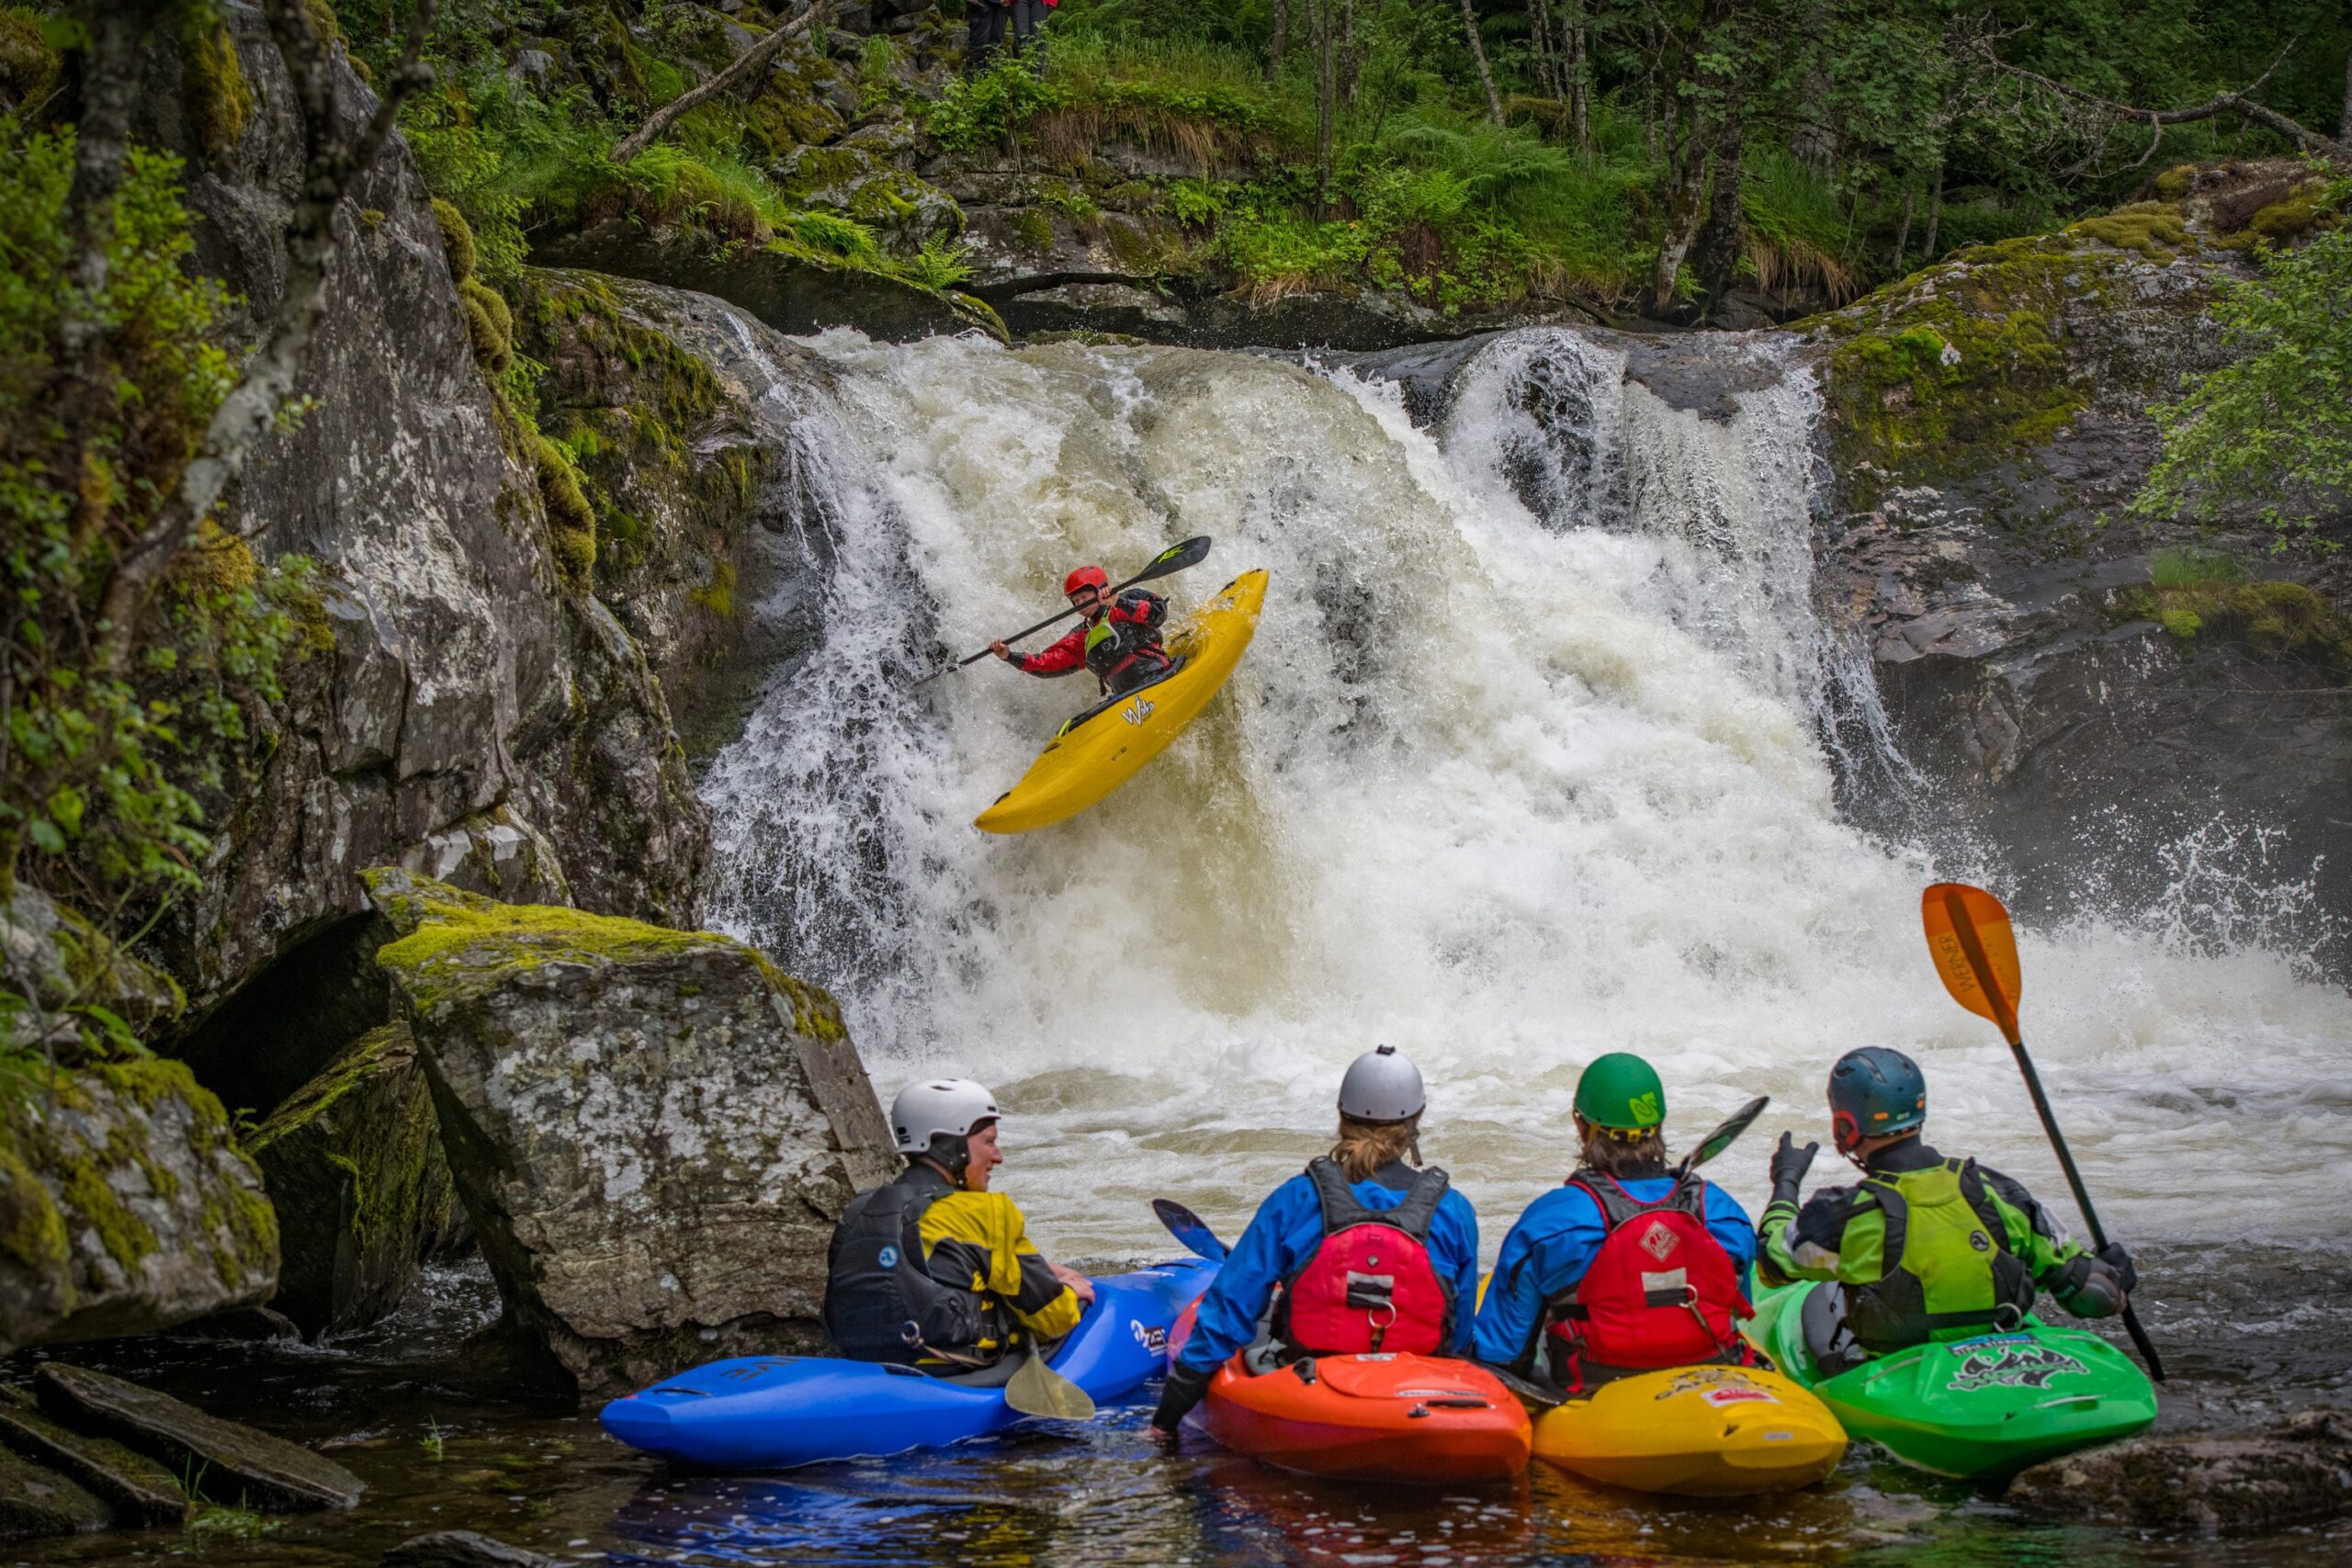 Top Whitewater Kayaking Rivers: Guide to Thrilling Adventures